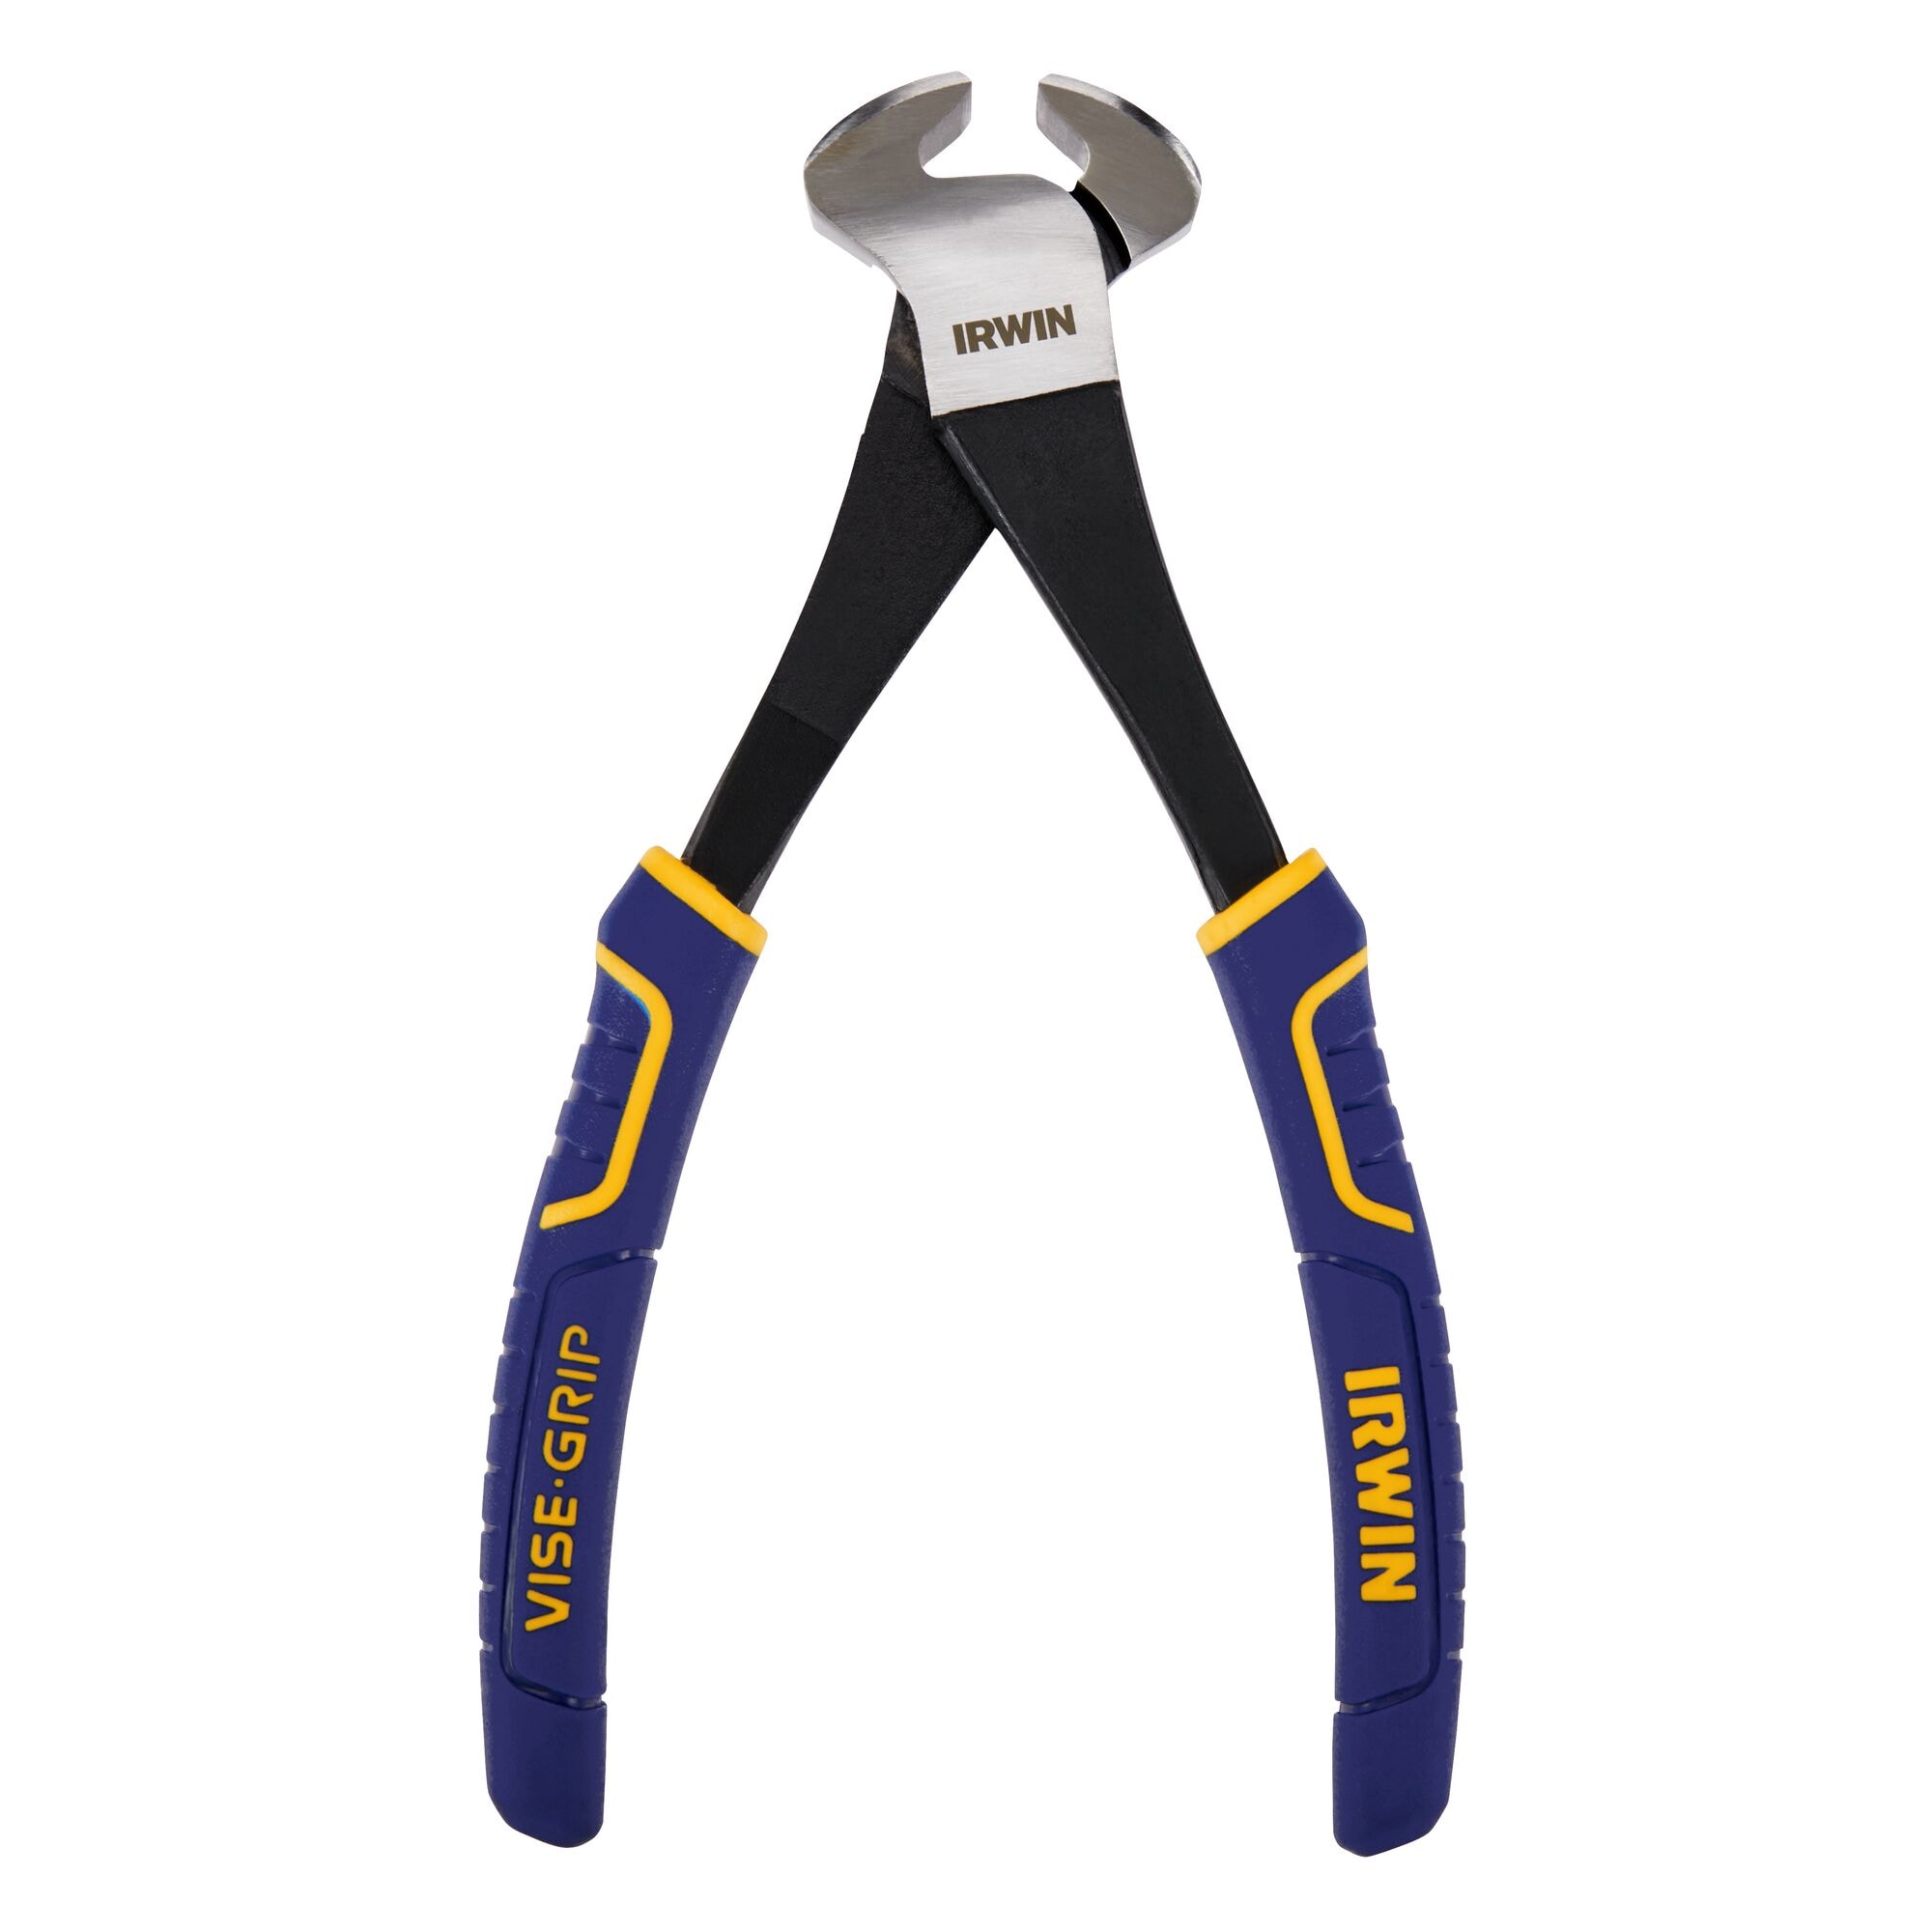 Irwin Vise-Grip 8 In. End Cutting Pliers - Thomas Do-it Center